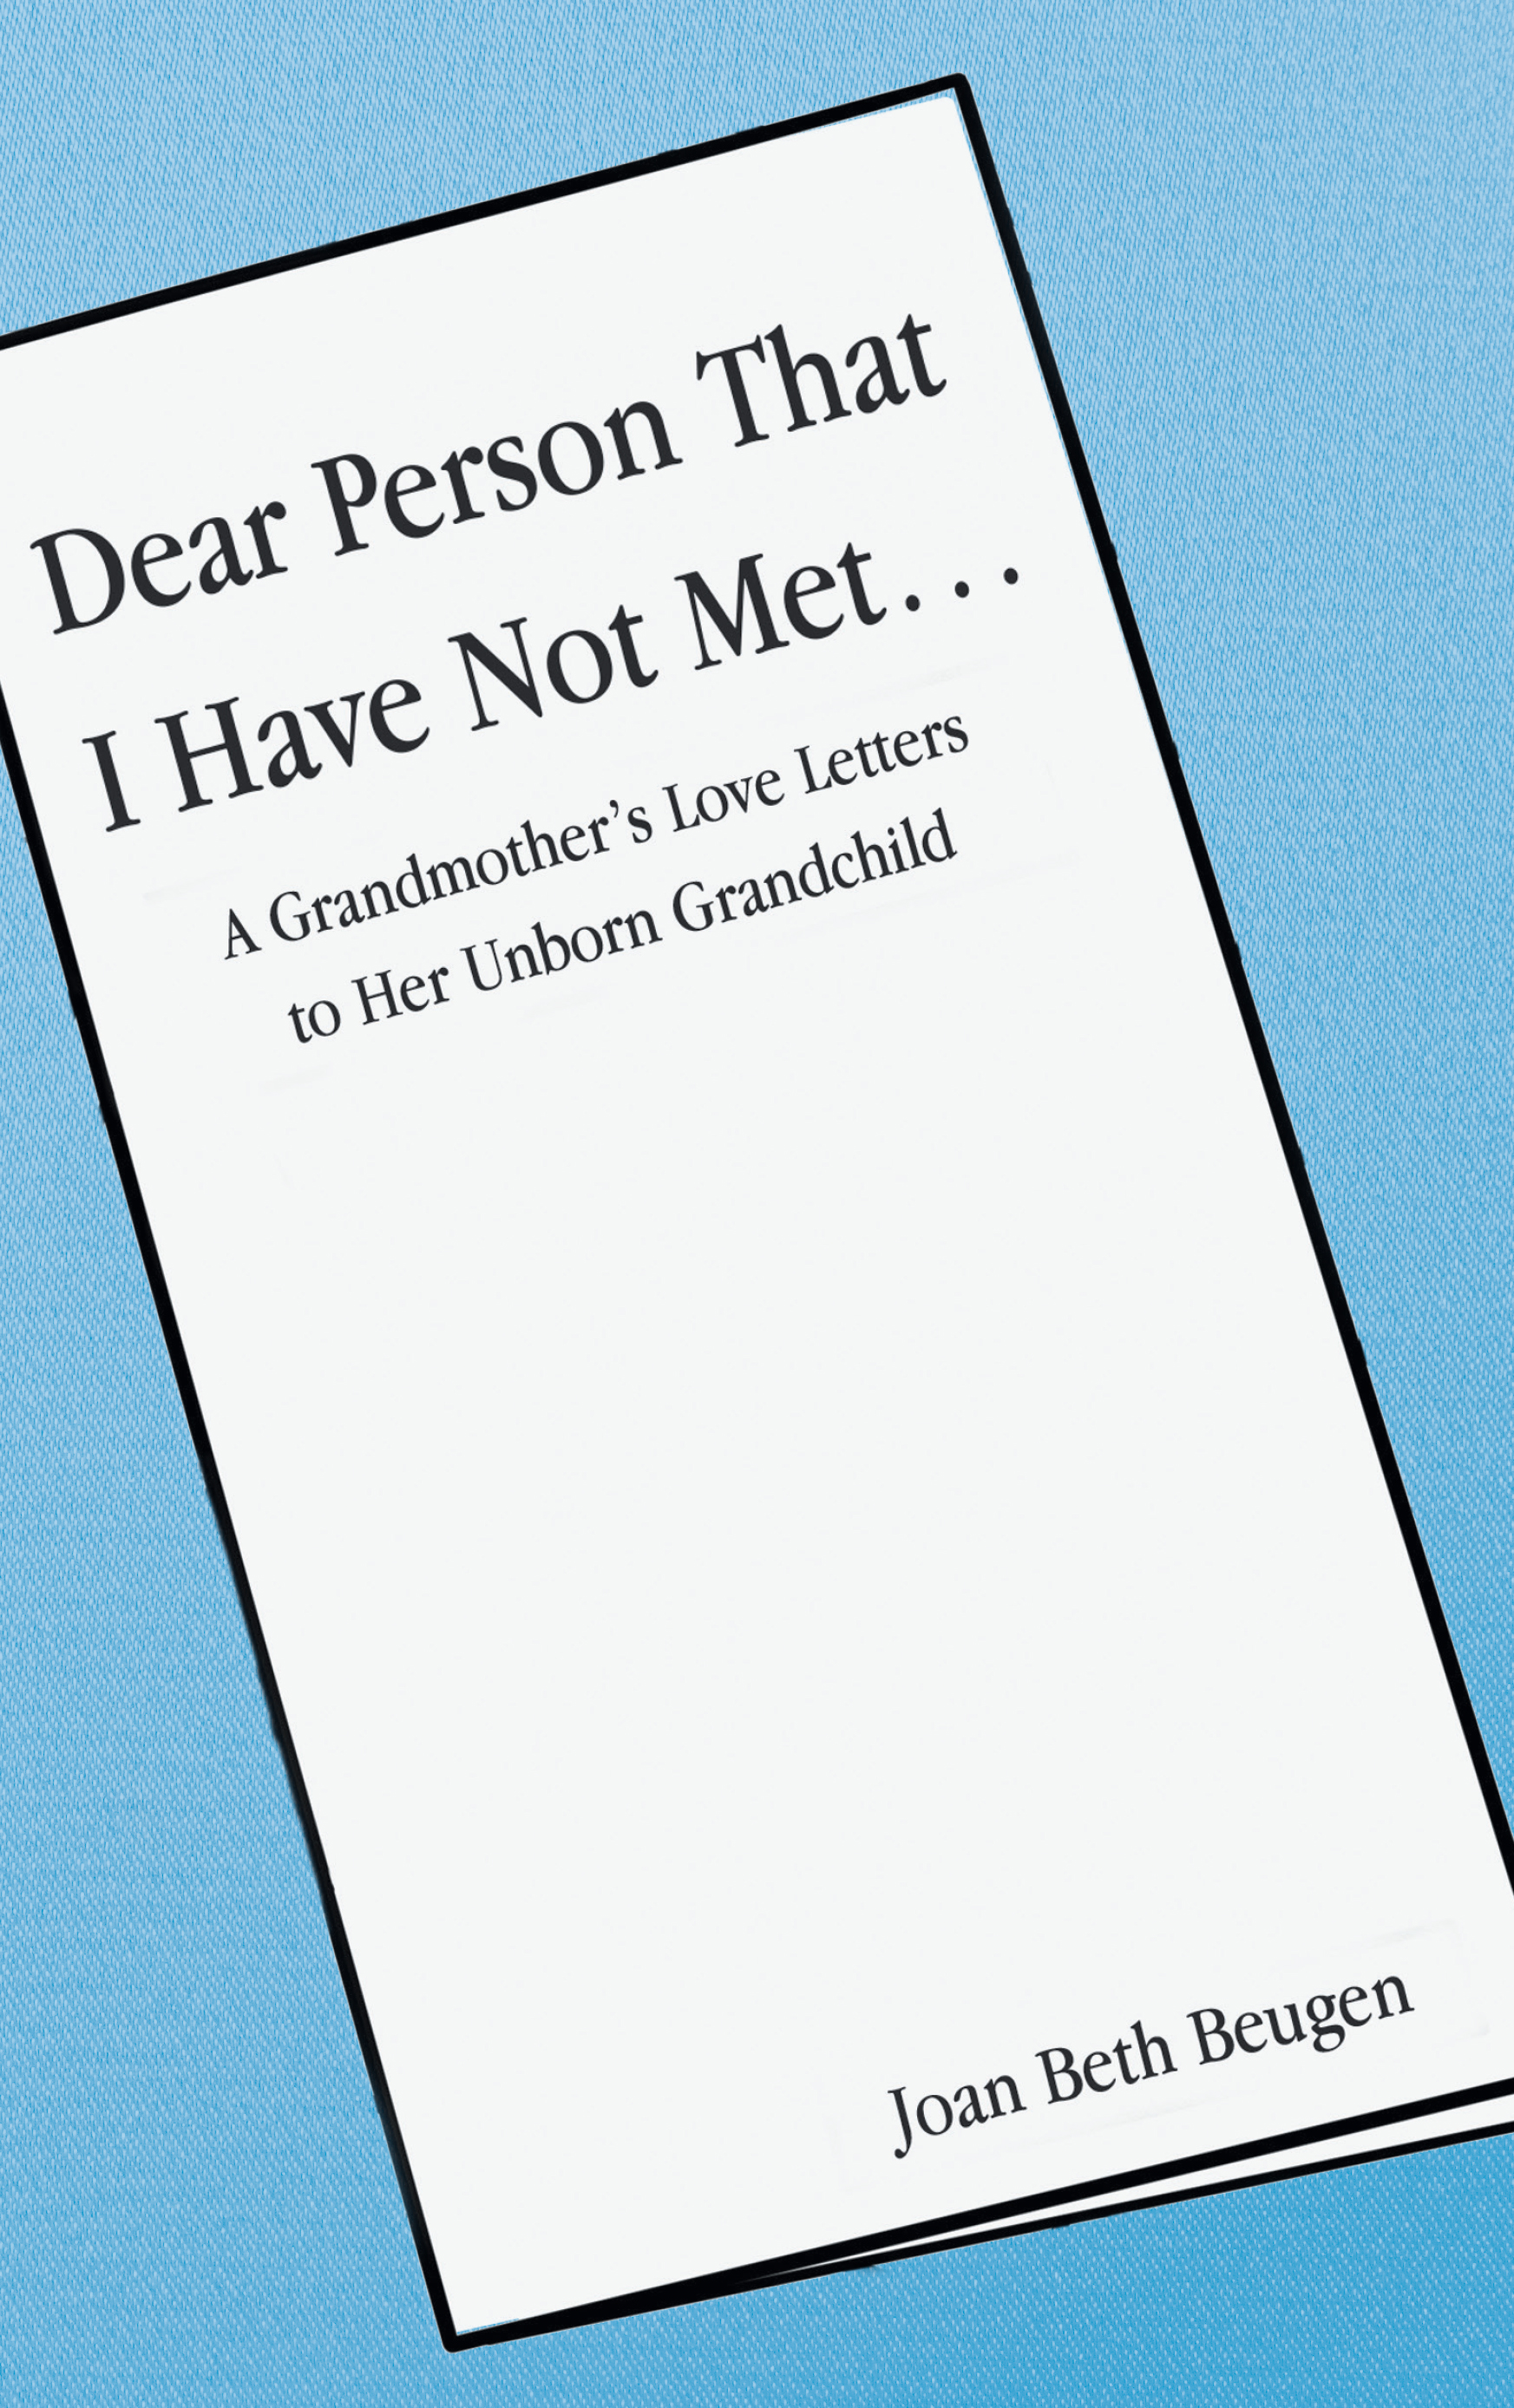 Joan Beth Beugen’s New Book, “Dear Person That I Have Not Met…,” is a Heartfelt Collection of Letters Written by the Author to Her Then Unborn Grandchild